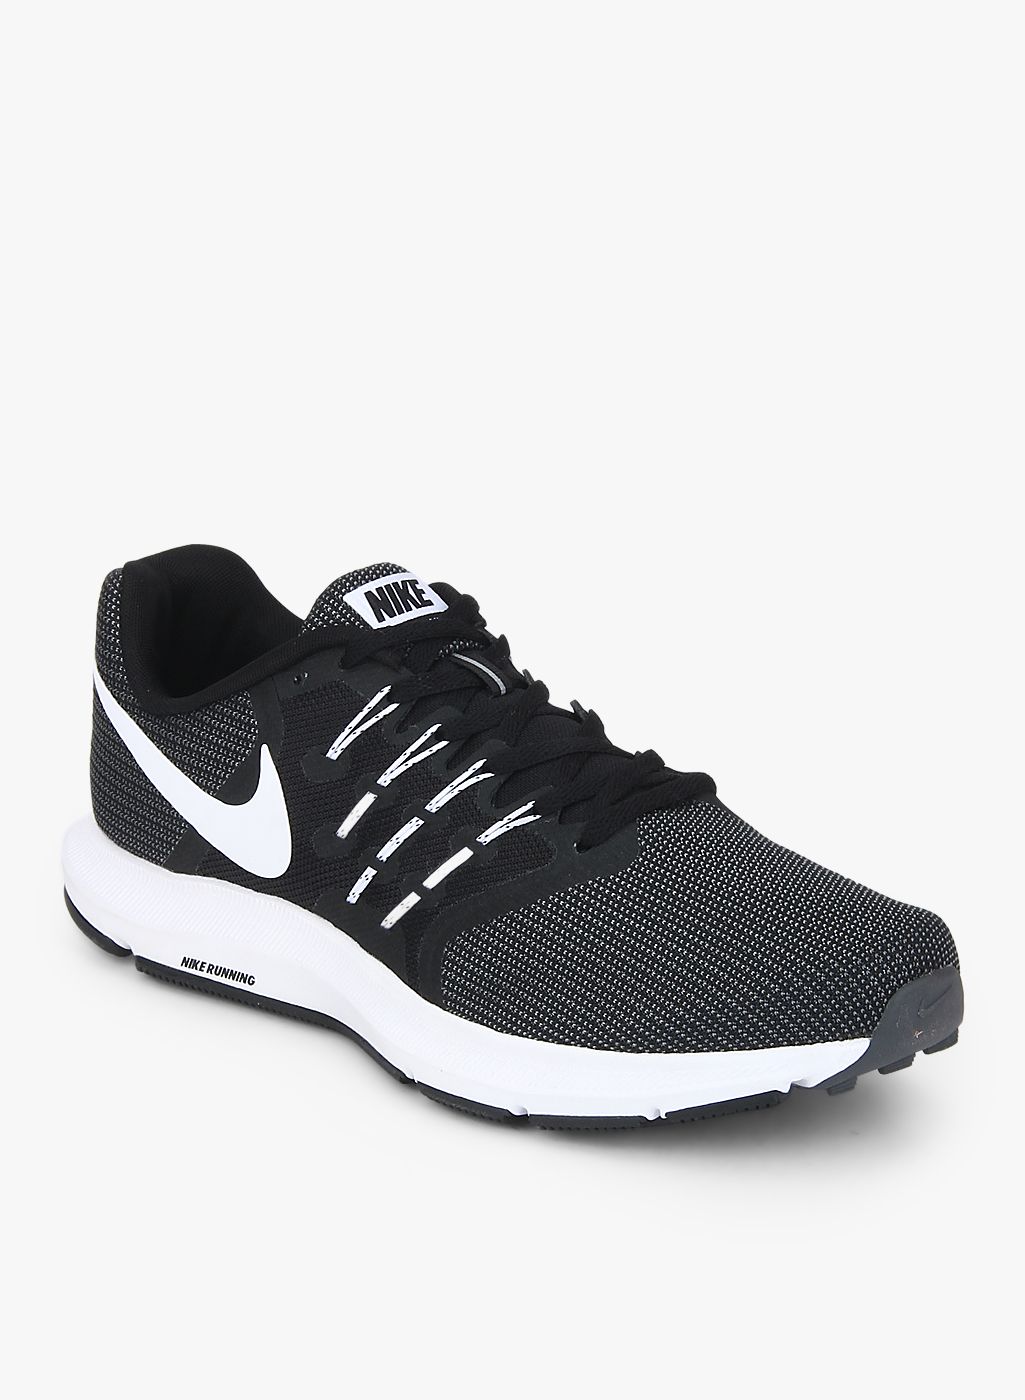 Nike Sport Shoes Online for Men in India at Best Prices | Jabong